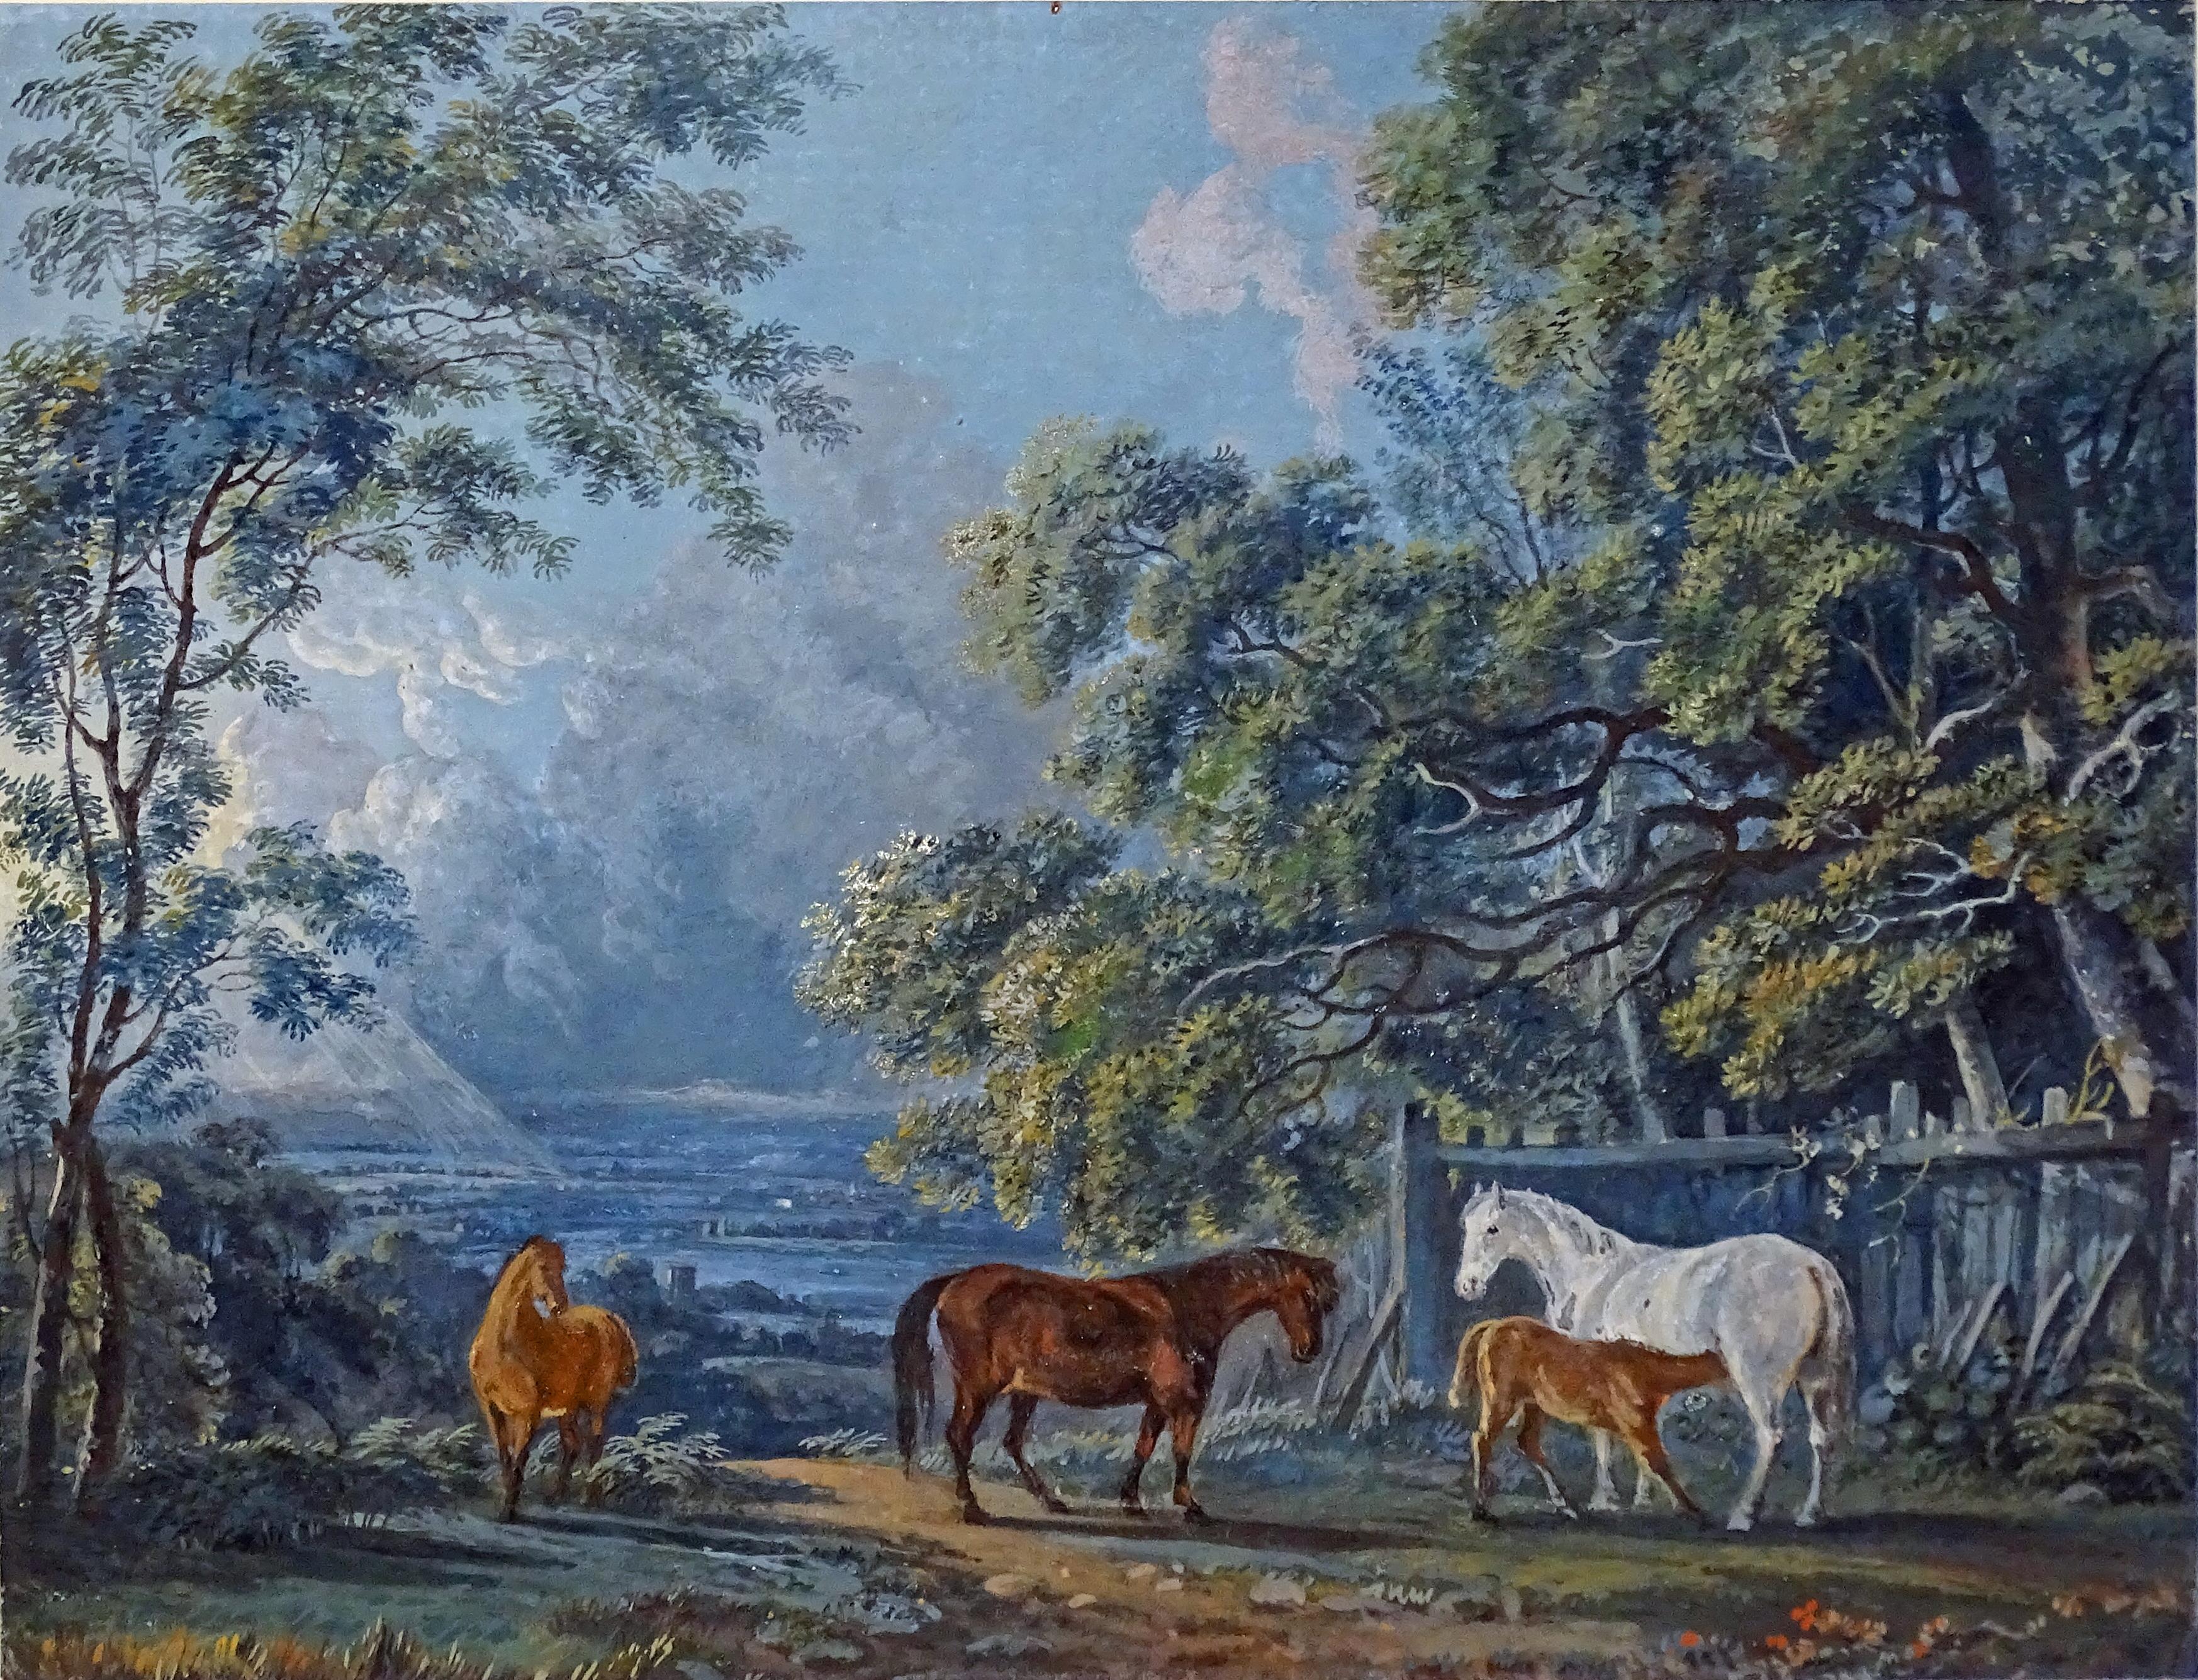 George Barret  Animal Art - Mares and foals in a landscape - Horses